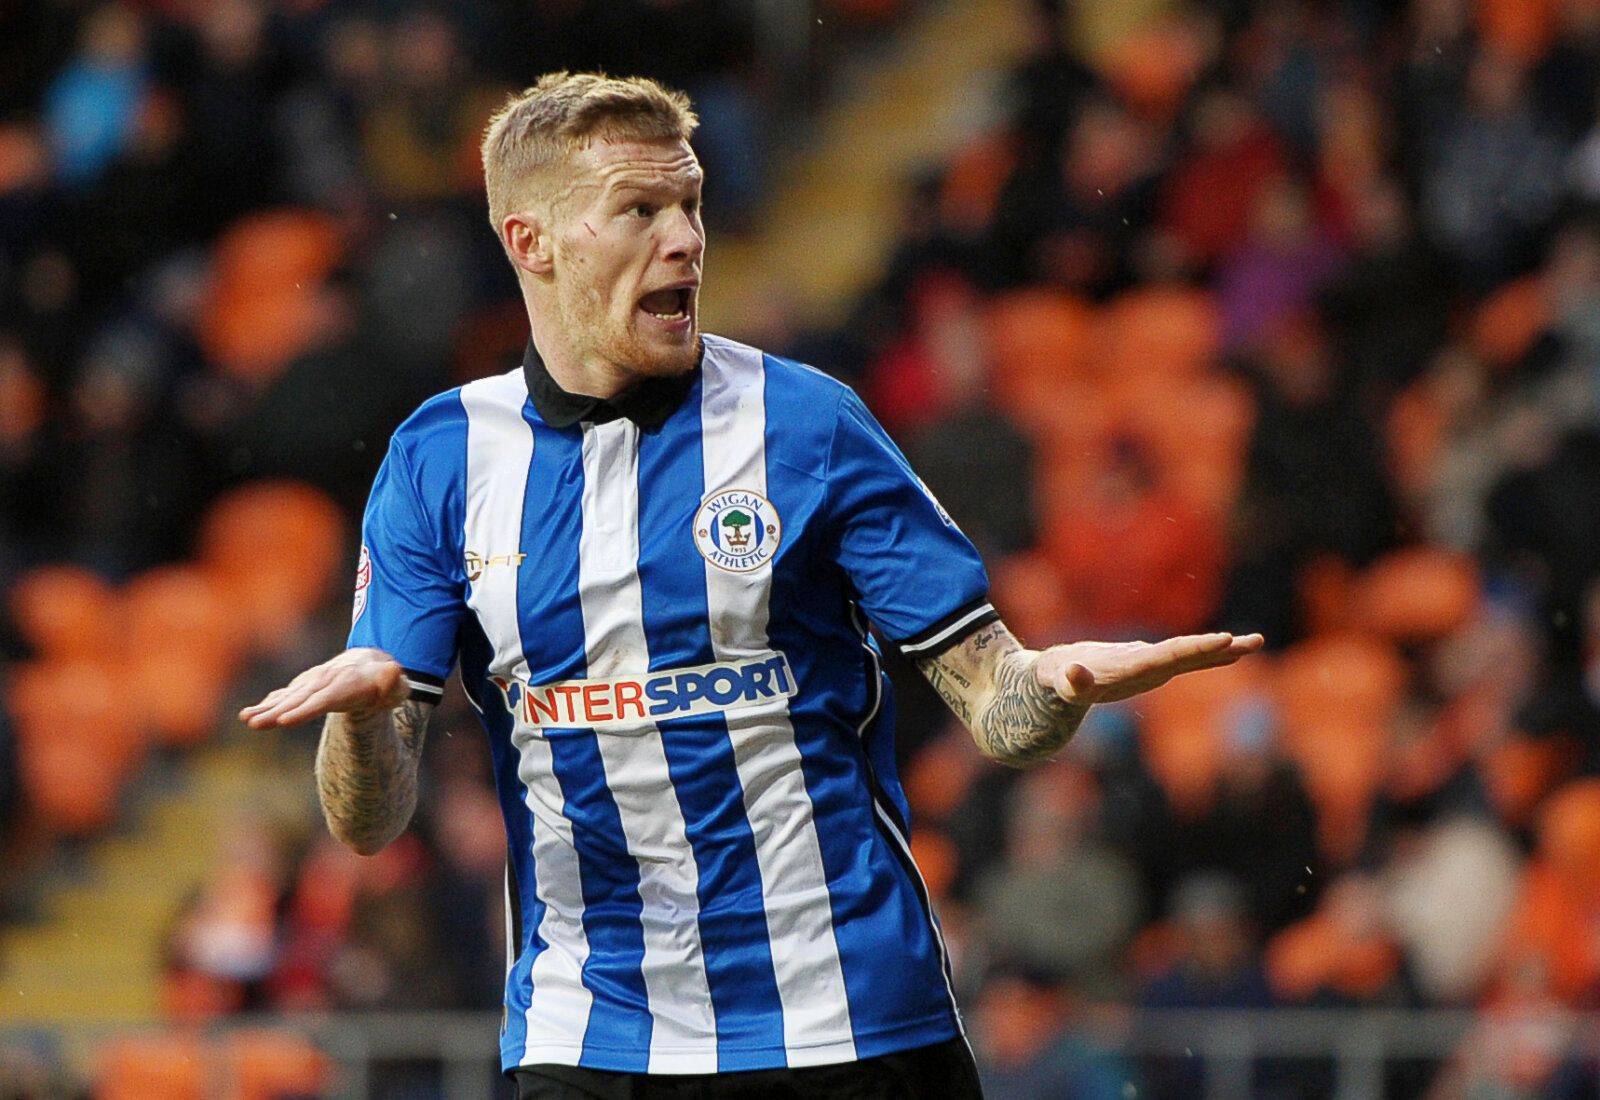 Football - Blackpool v Wigan Athletic - Sky Bet Football League Championship - Bloomfield Road - 28/2/15 
Wigan Athletic's James McClean celebrates scoring their third goal 
Mandatory Credit: Action Images / Paul Burrows 
Livepic 
EDITORIAL USE ONLY. No use with unauthorized audio, video, data, fixture lists, club/league logos or 